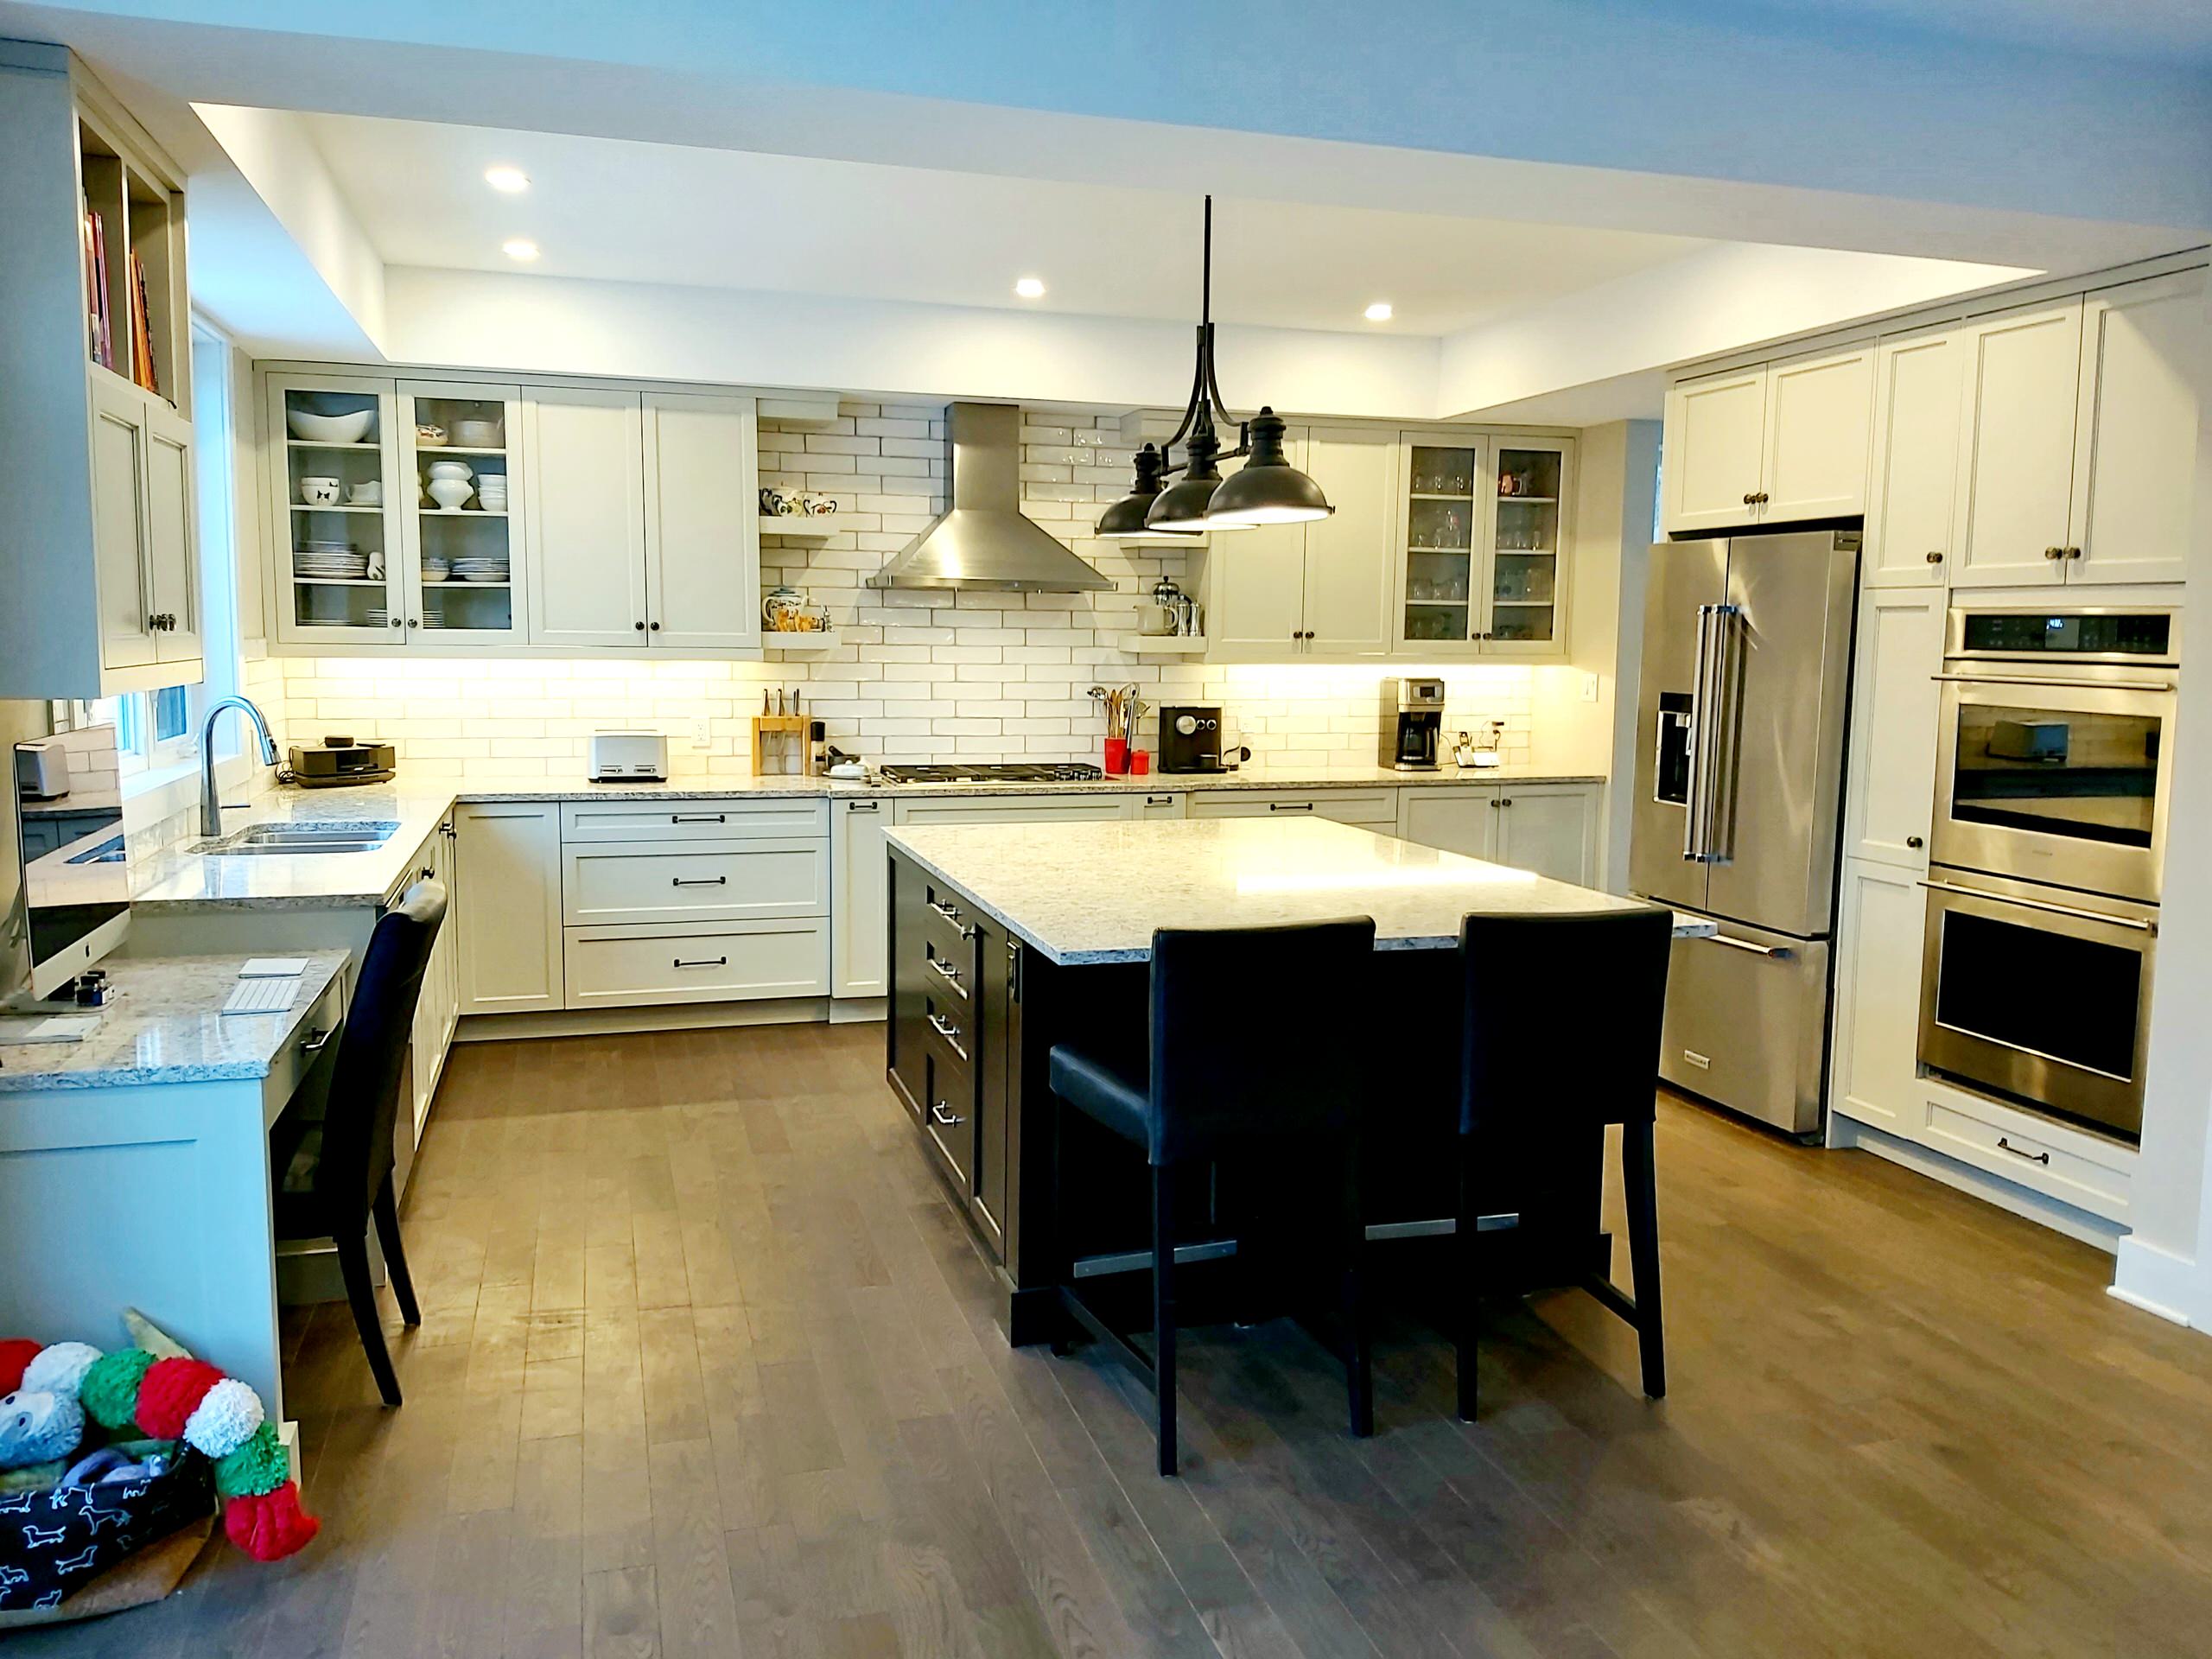 A two-toned kitchen design by Deslaurier